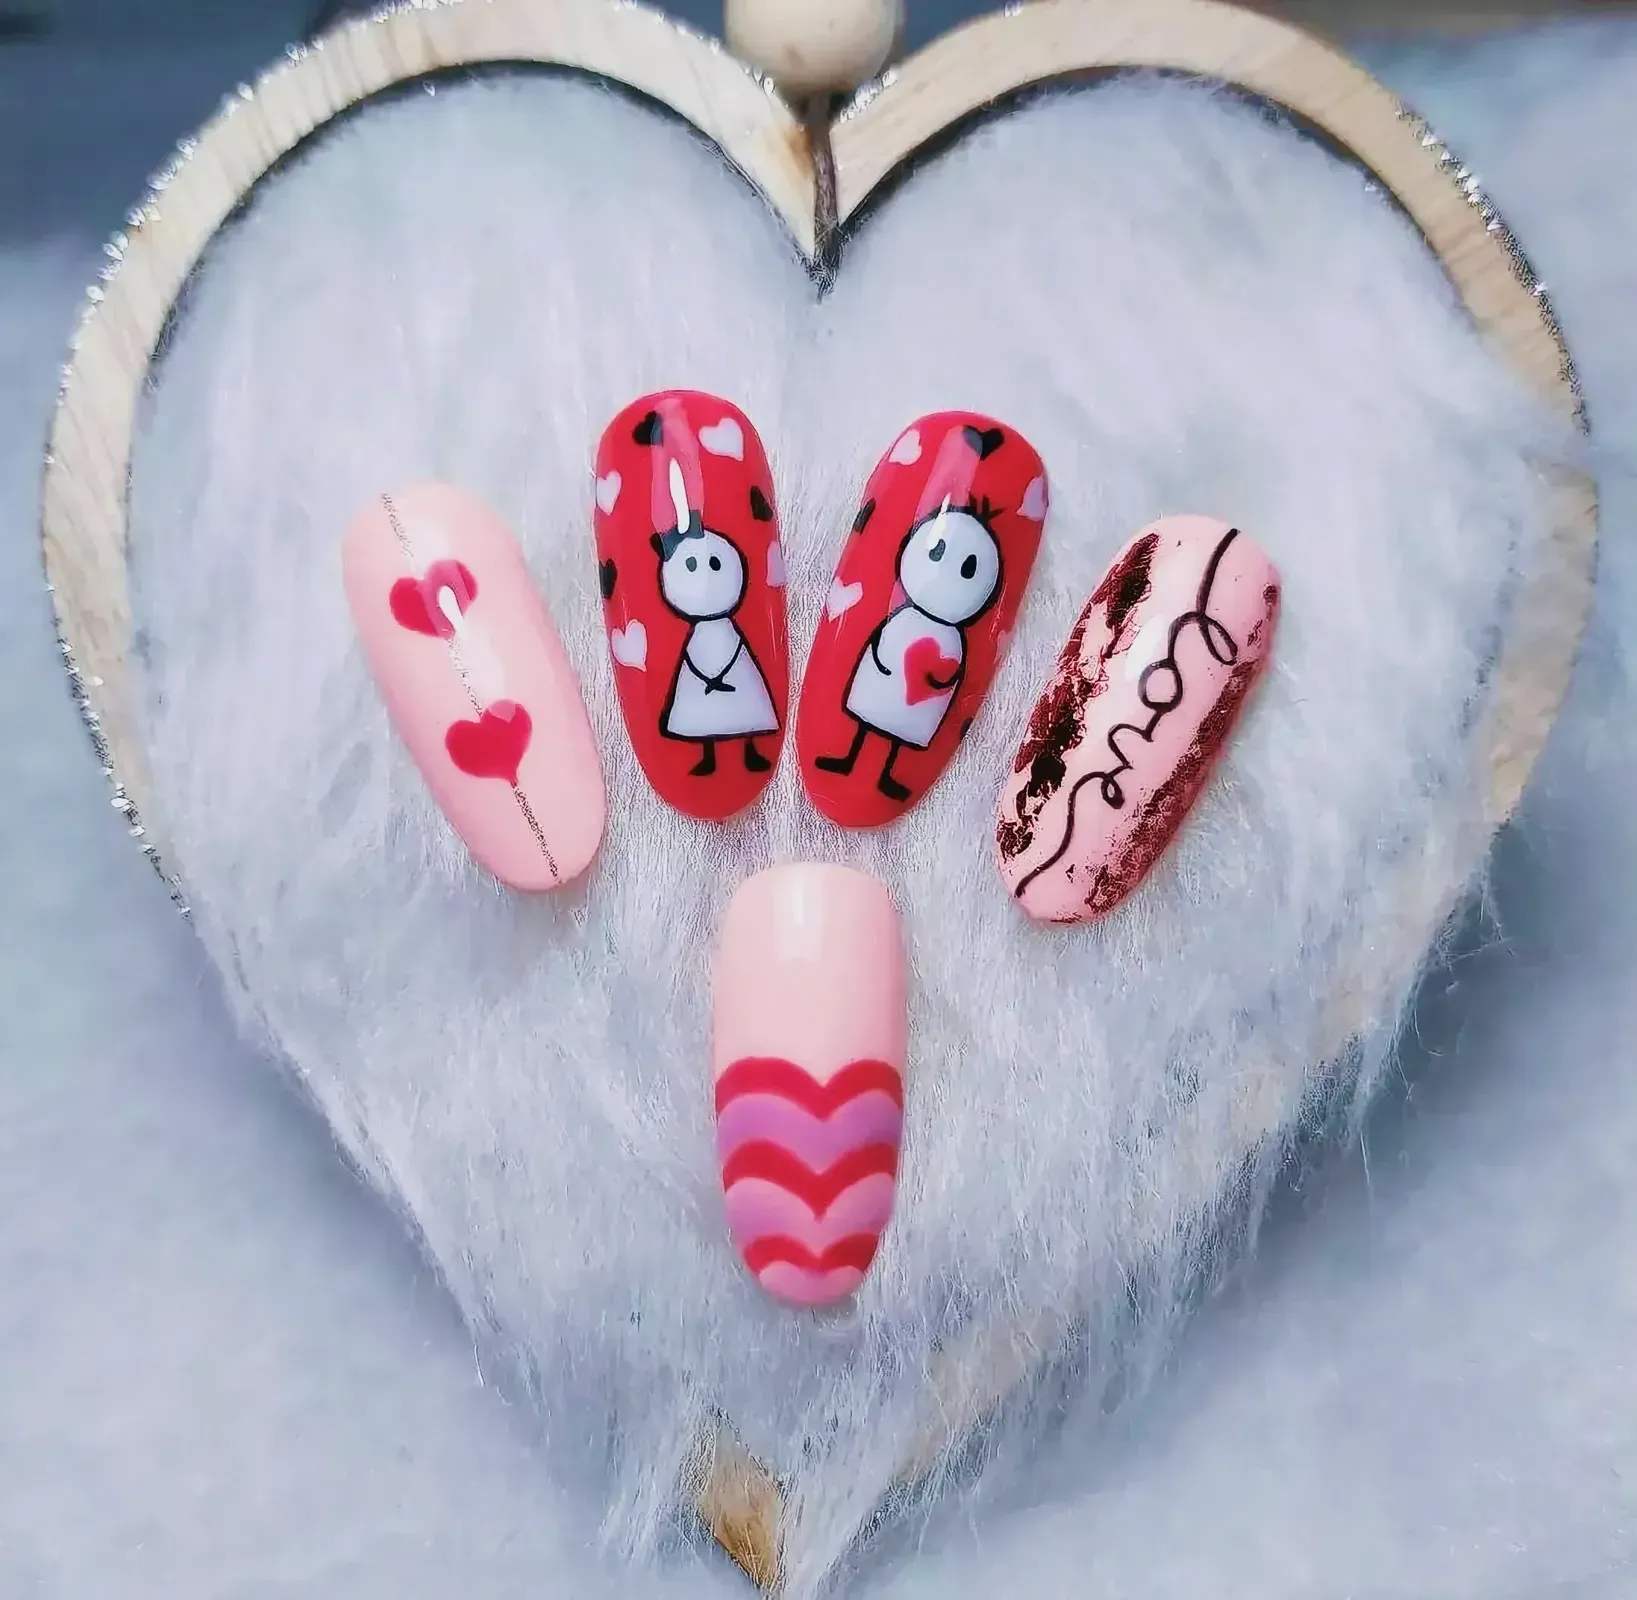 Valentine's Day decorations with painted heart-shaped nails